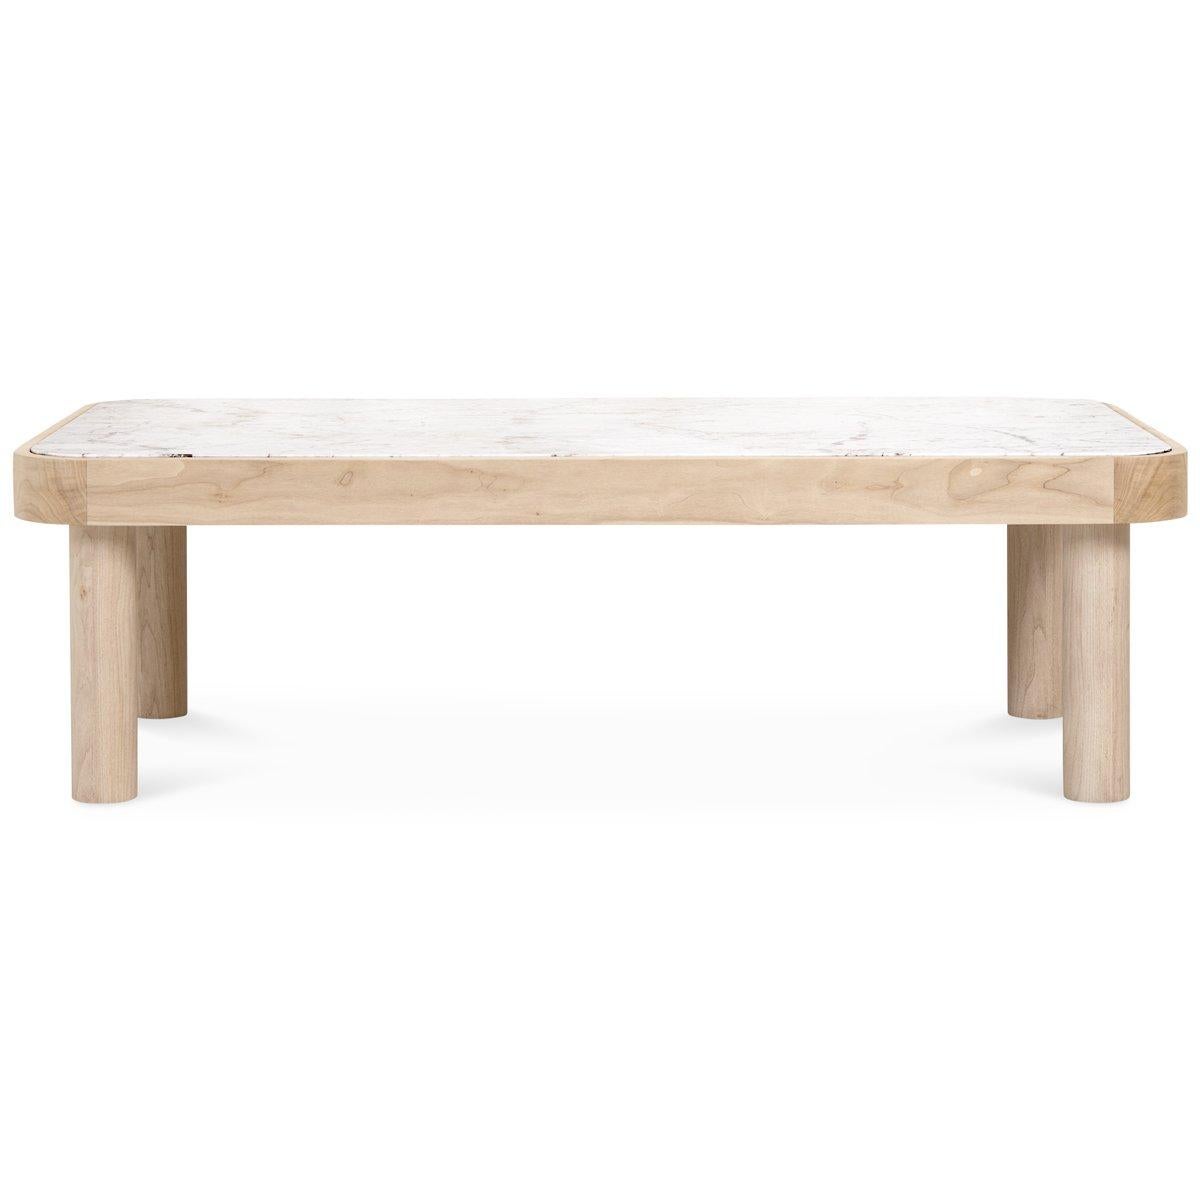 Smooth curves and natural materials are the highlights of this coffee table. Featuring a beautiful Carrara marble top bleached solid North American walnut legs and frame.
   